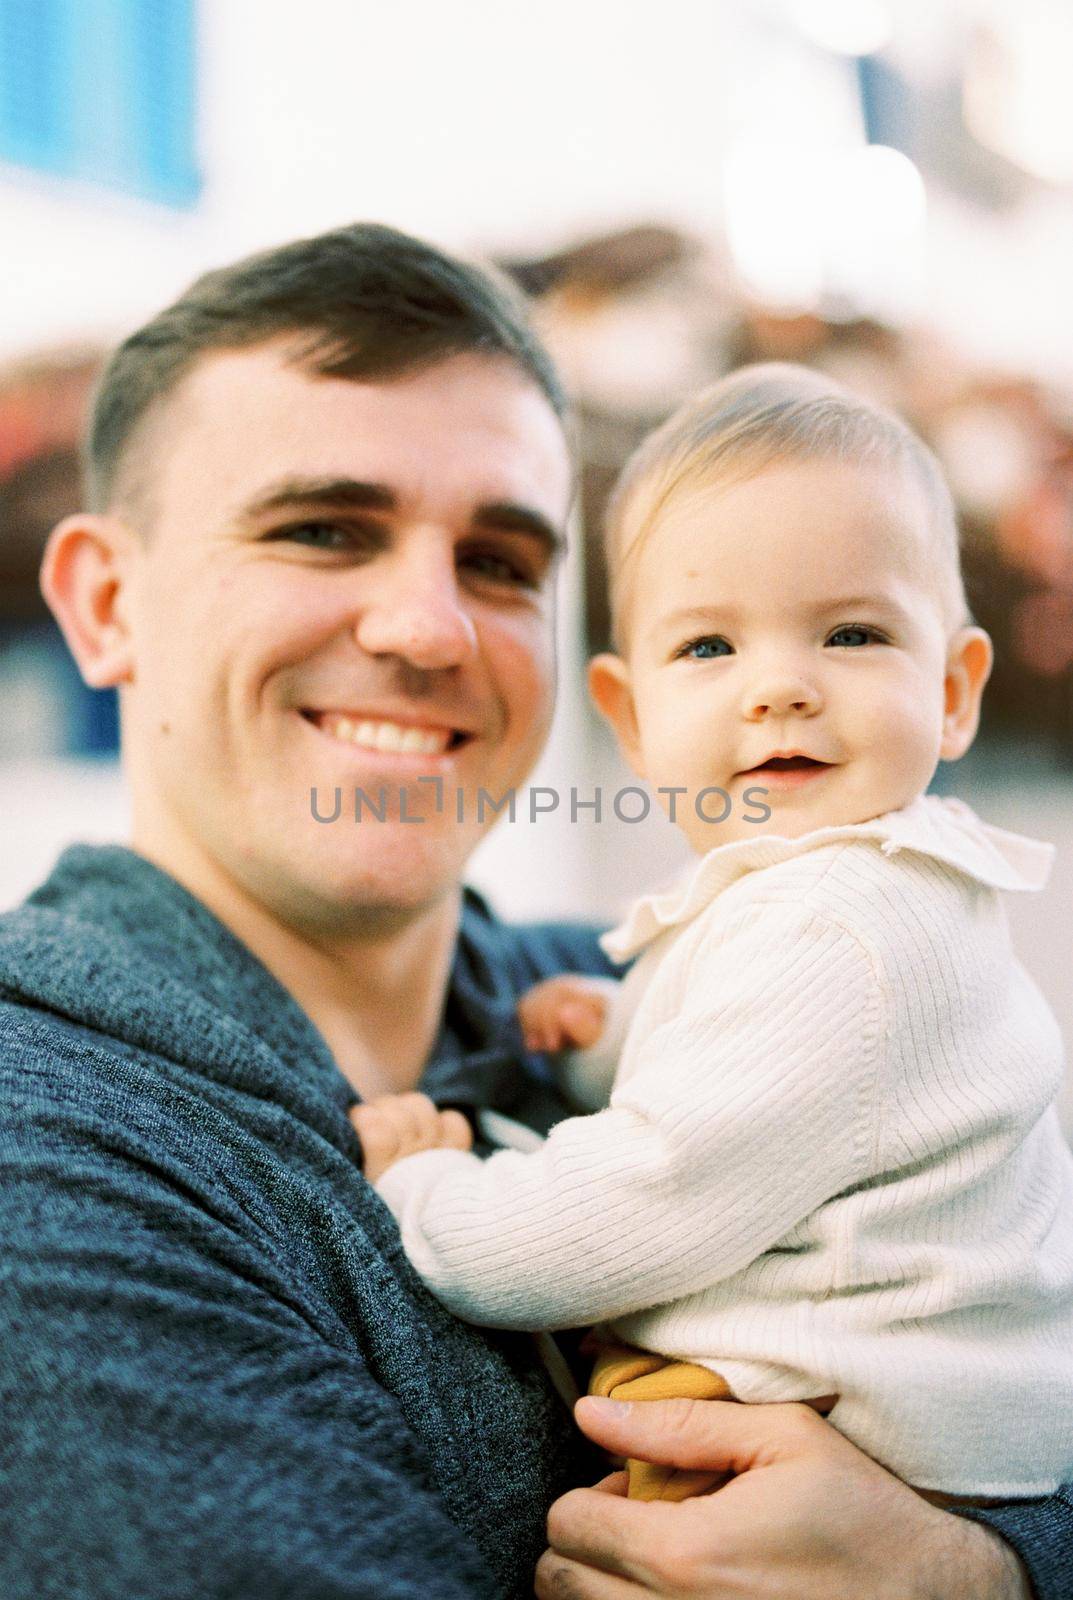 Dad with a baby in his arms stands near the house. Portrait by Nadtochiy